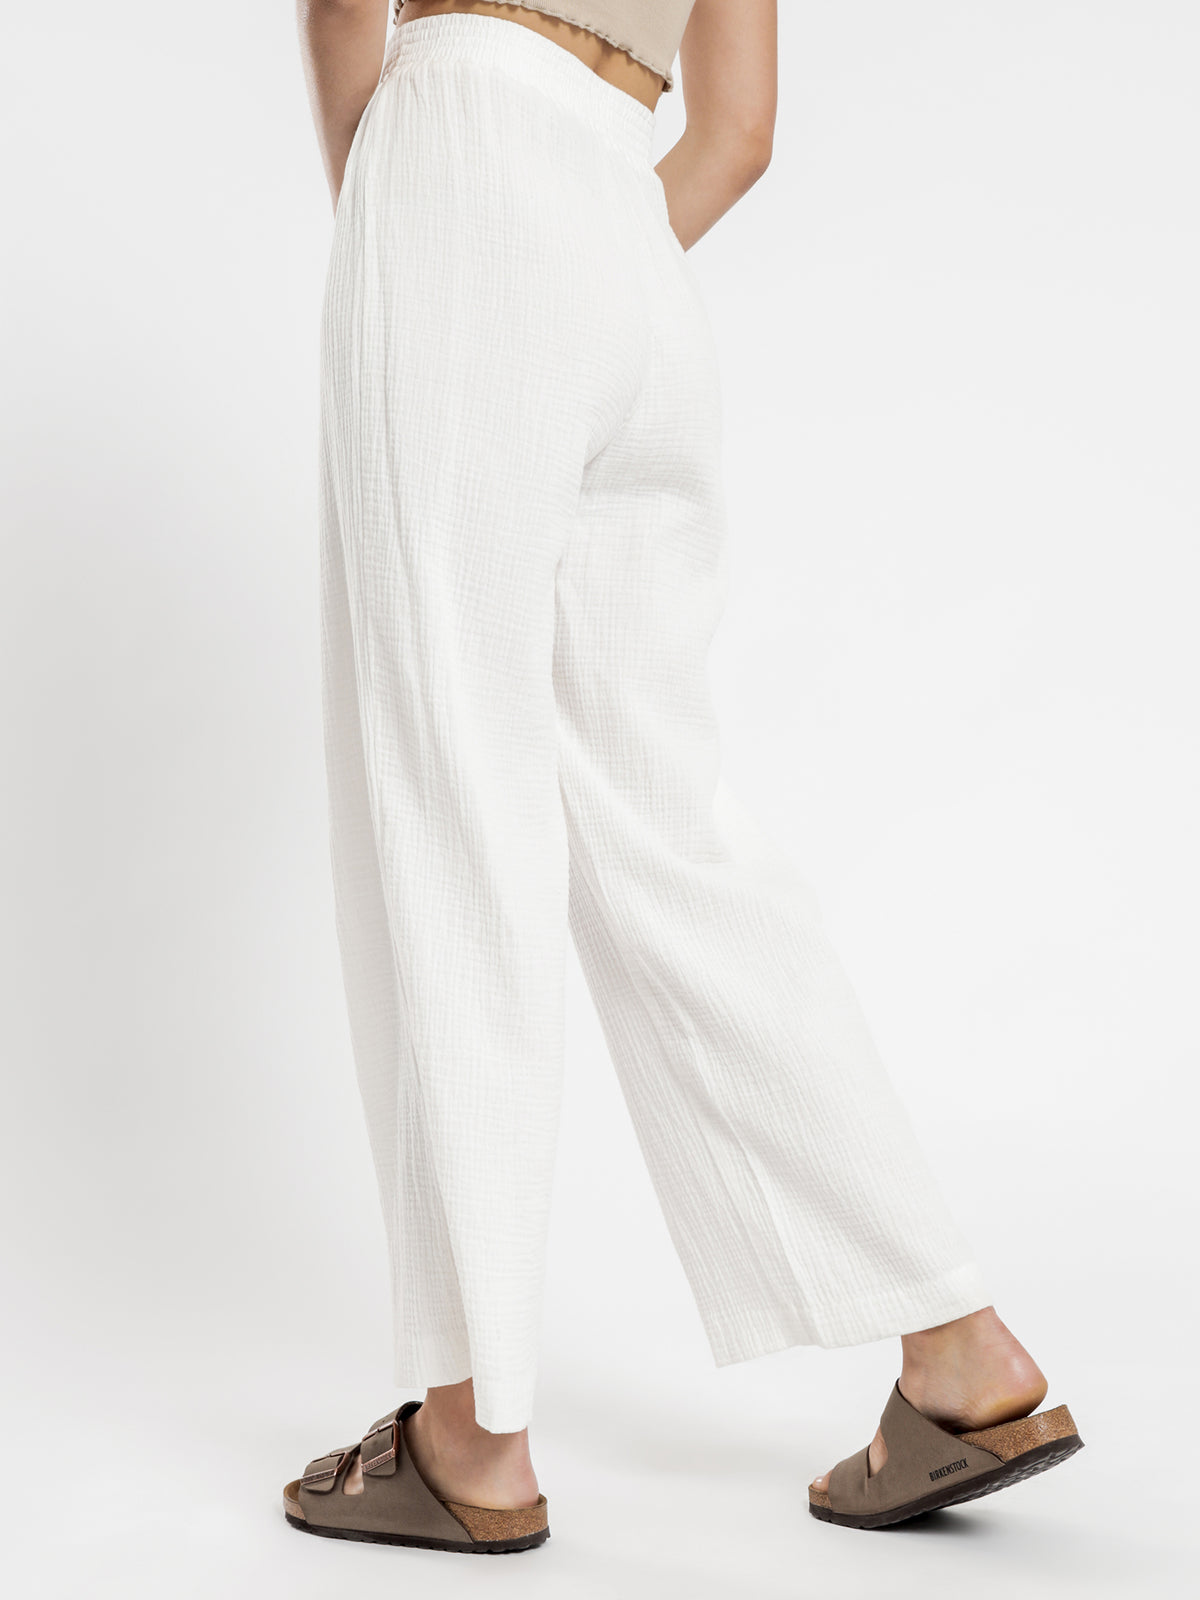 Norah Textured Pants in White